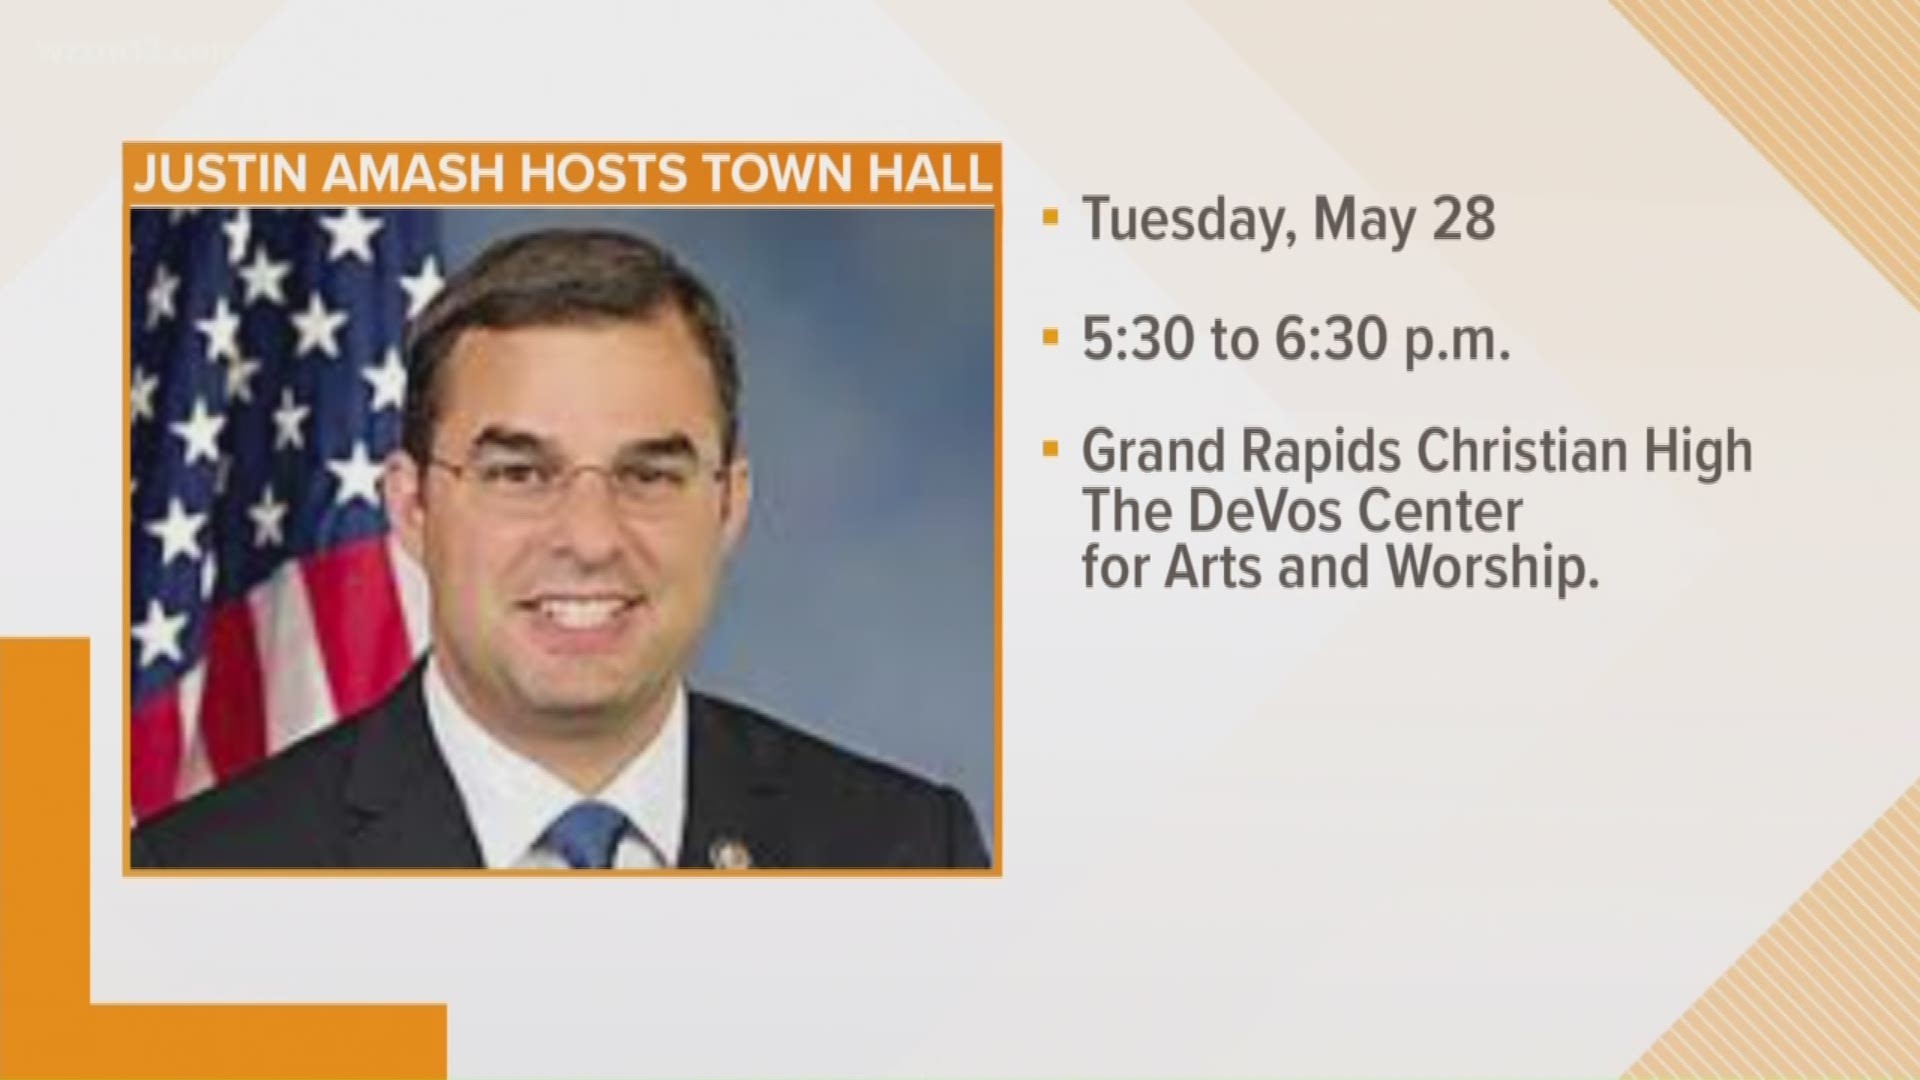 Republican U.S. Rep. Justin Amash will be hosting a town hall meeting in Grand Rapids next week. The meeting will take place from 5:30 to 6:30 p.m. on Tuesday, May 28, at Grand Rapids Christian High School in the DeVos Center for Arts and Worship.